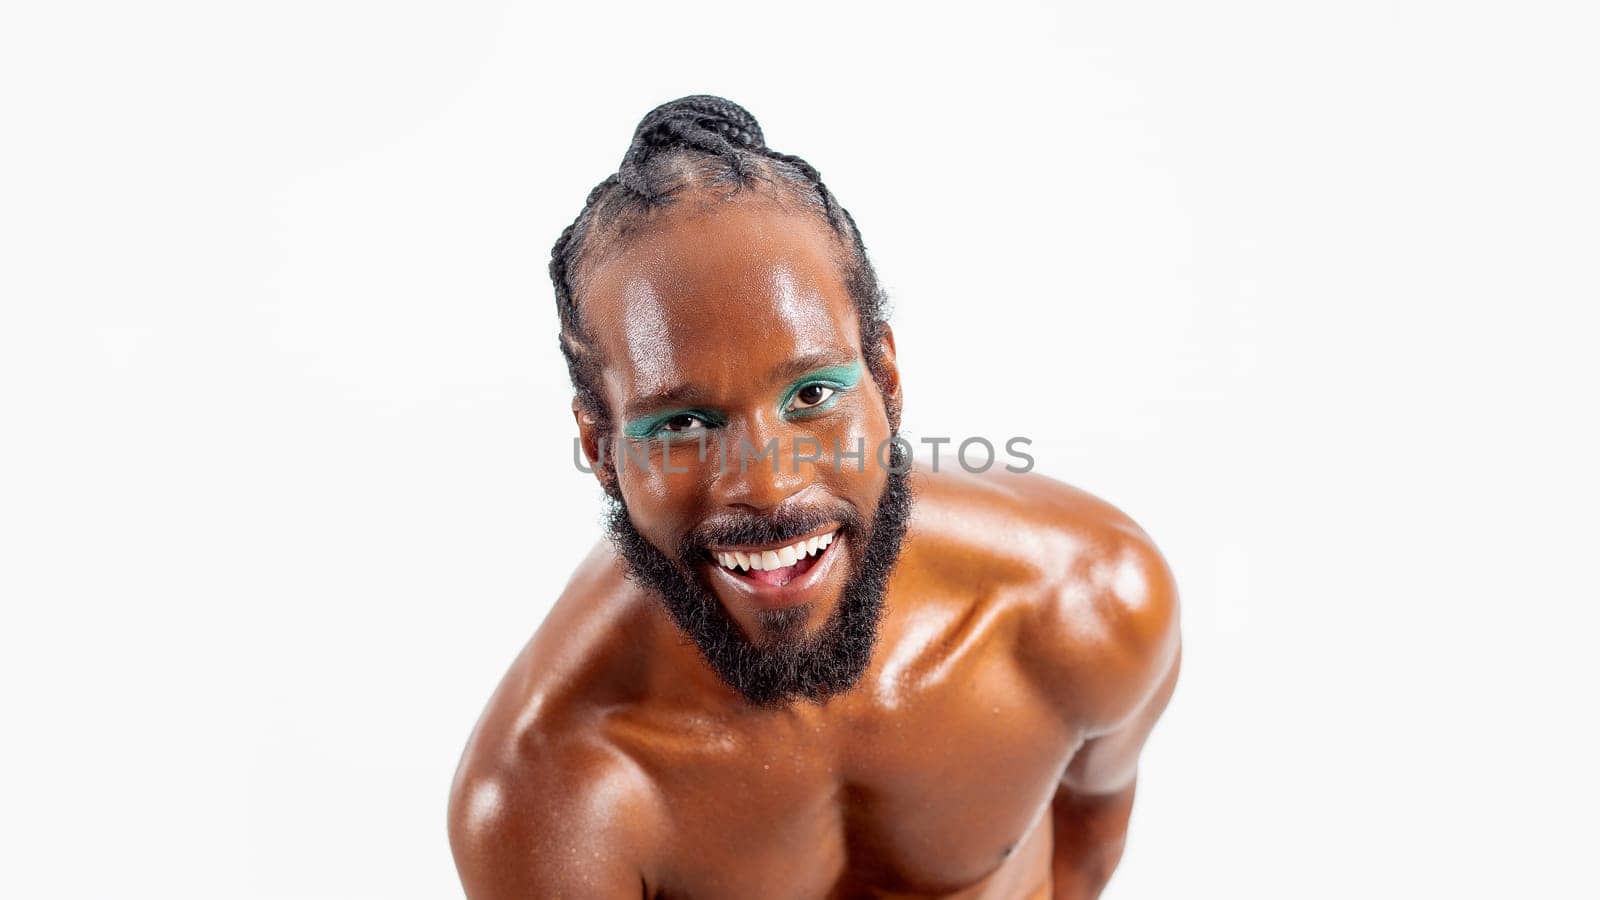 Smiling african-american bearded gay man with bright makeup isolated on white background. Exudes sense of pride and individuality. Diversity power of personality.